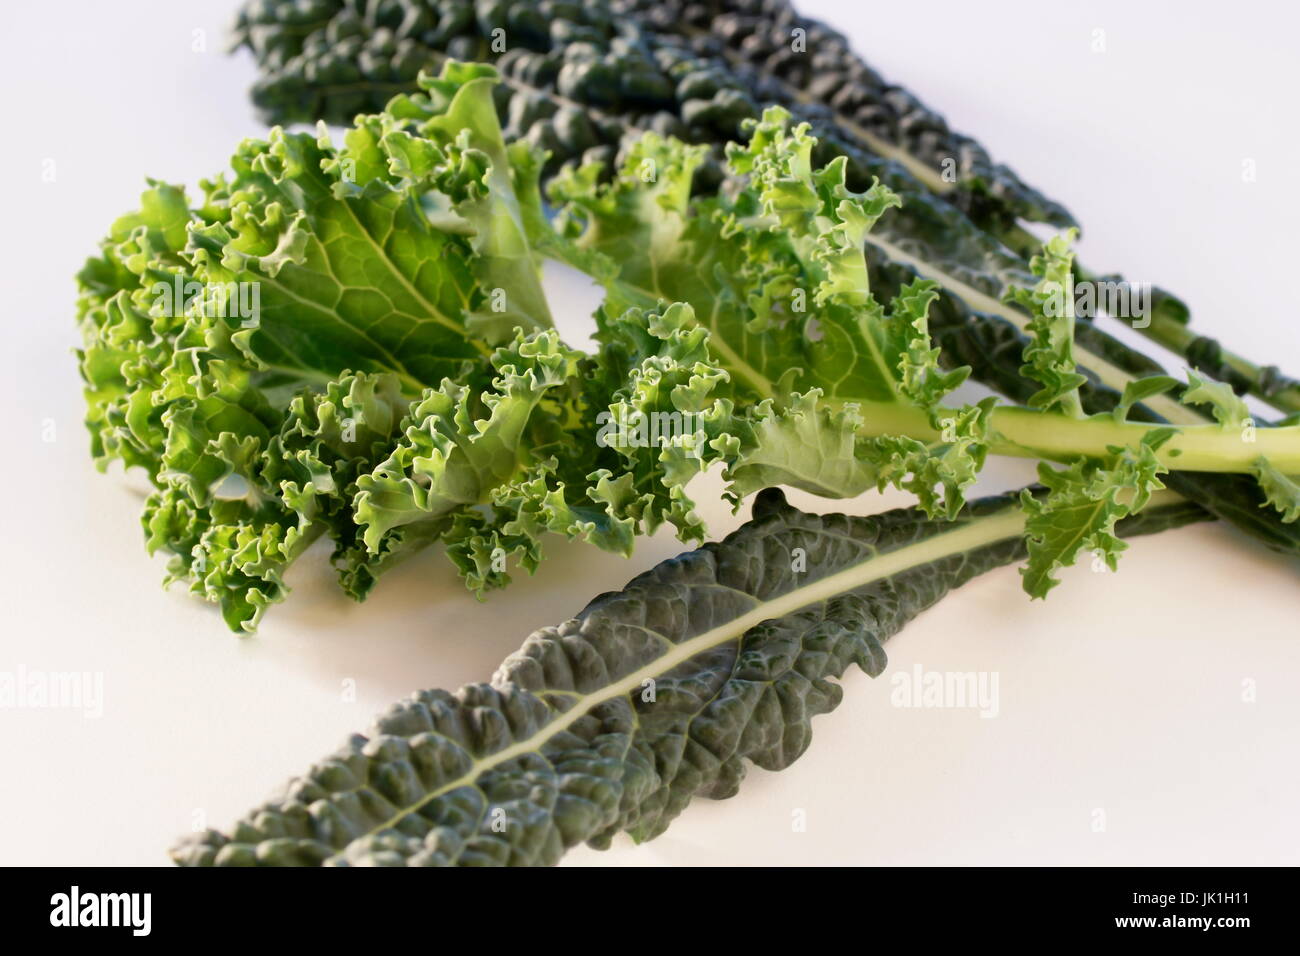 Popular kale varieties, Blue Curled Vates Kale end  Tuscan kale on a white background Stock Photo